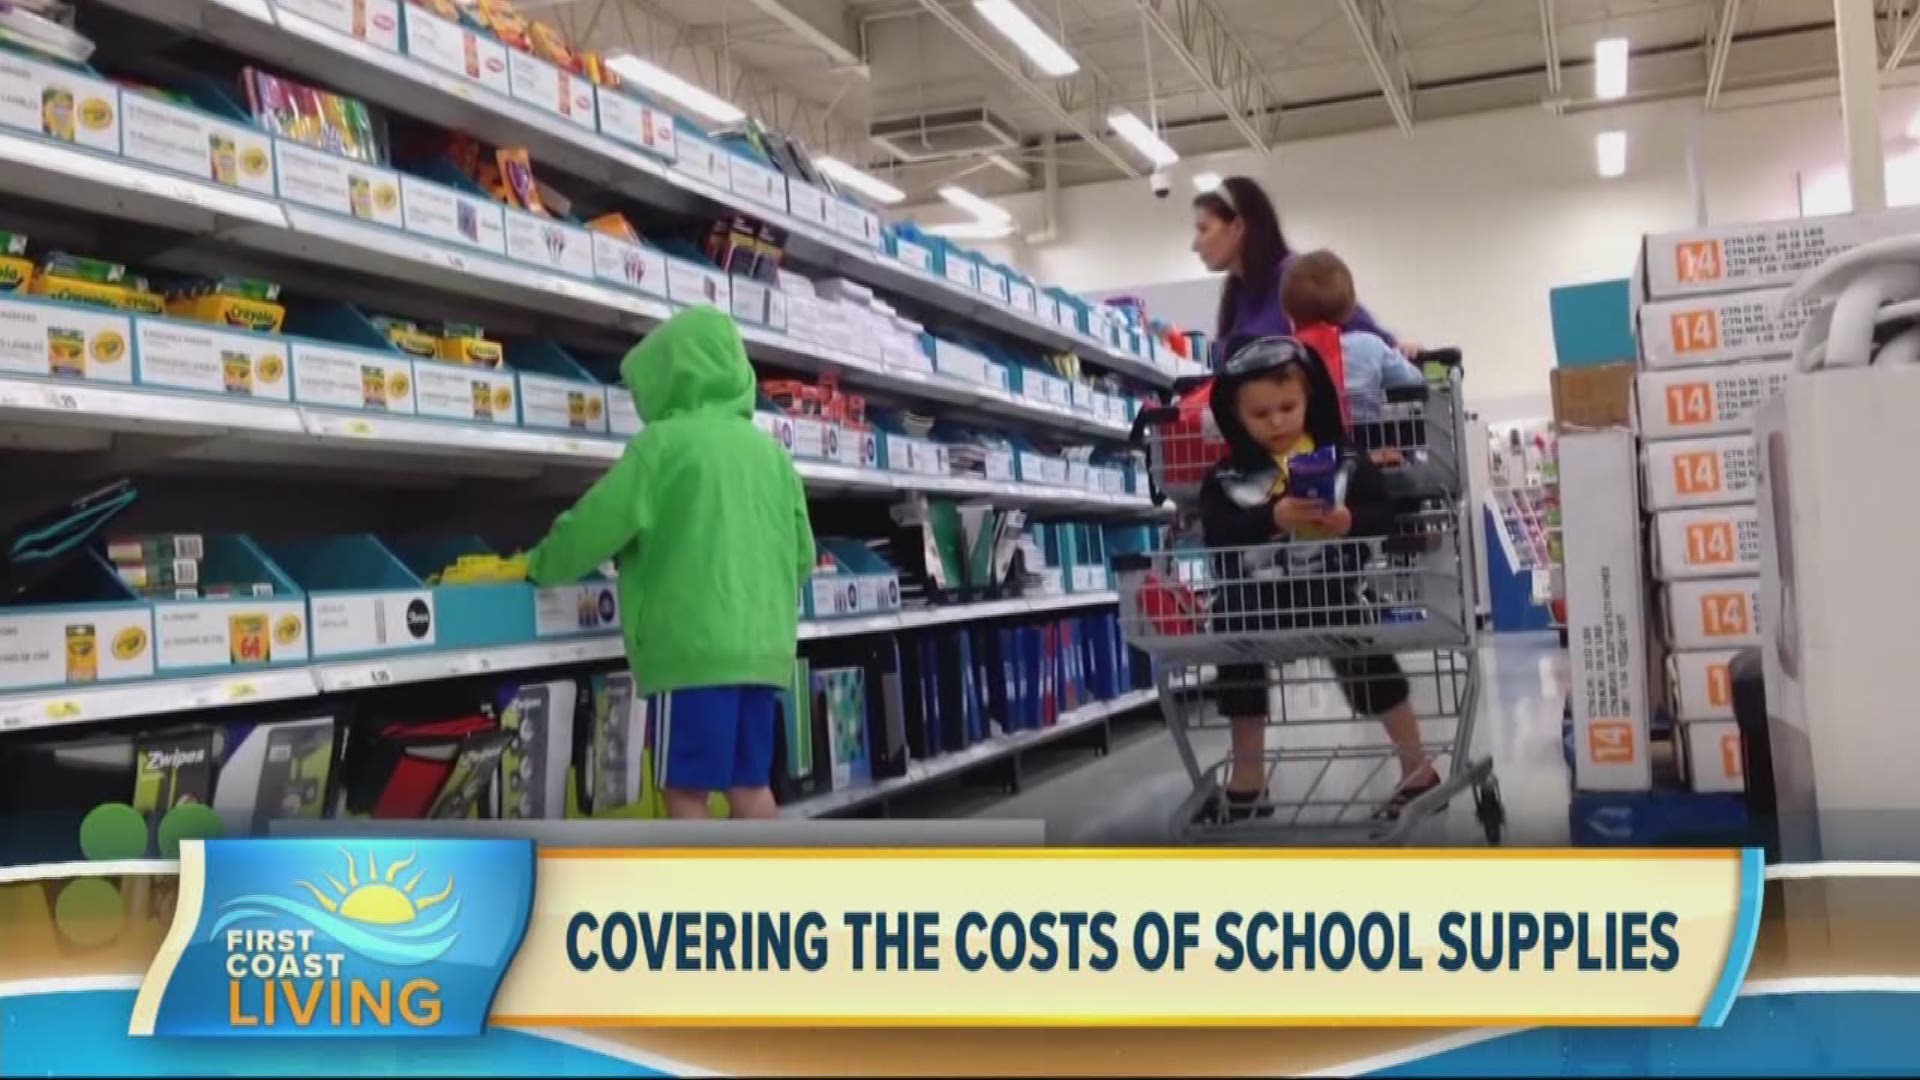 Parents are finding creative ways to cover the back-to-school costs this year.